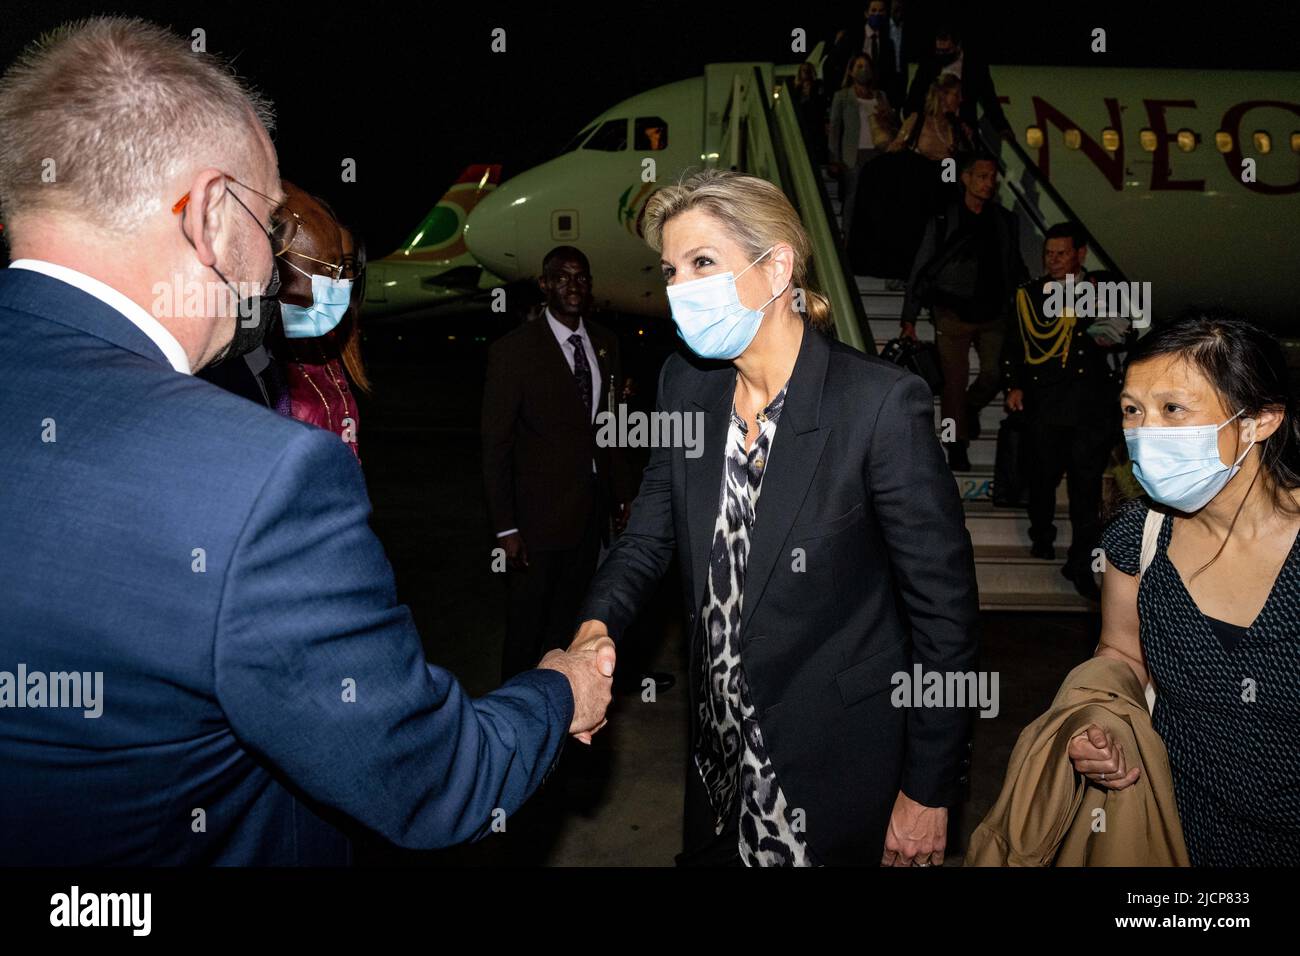 2022-06-15 01:05:57 DAKAR - Queen Maxima arrives at Dakar's Blaise Diagne Airport in Senegal. Maxima visits Ivory Coast, and Senegal, in her role as the United Nations Secretary-General's Special Advocate for Inclusive Finance for Development. ANP POOL MISCHA SCHOEMAKER netherlands out - belgium out Stock Photo